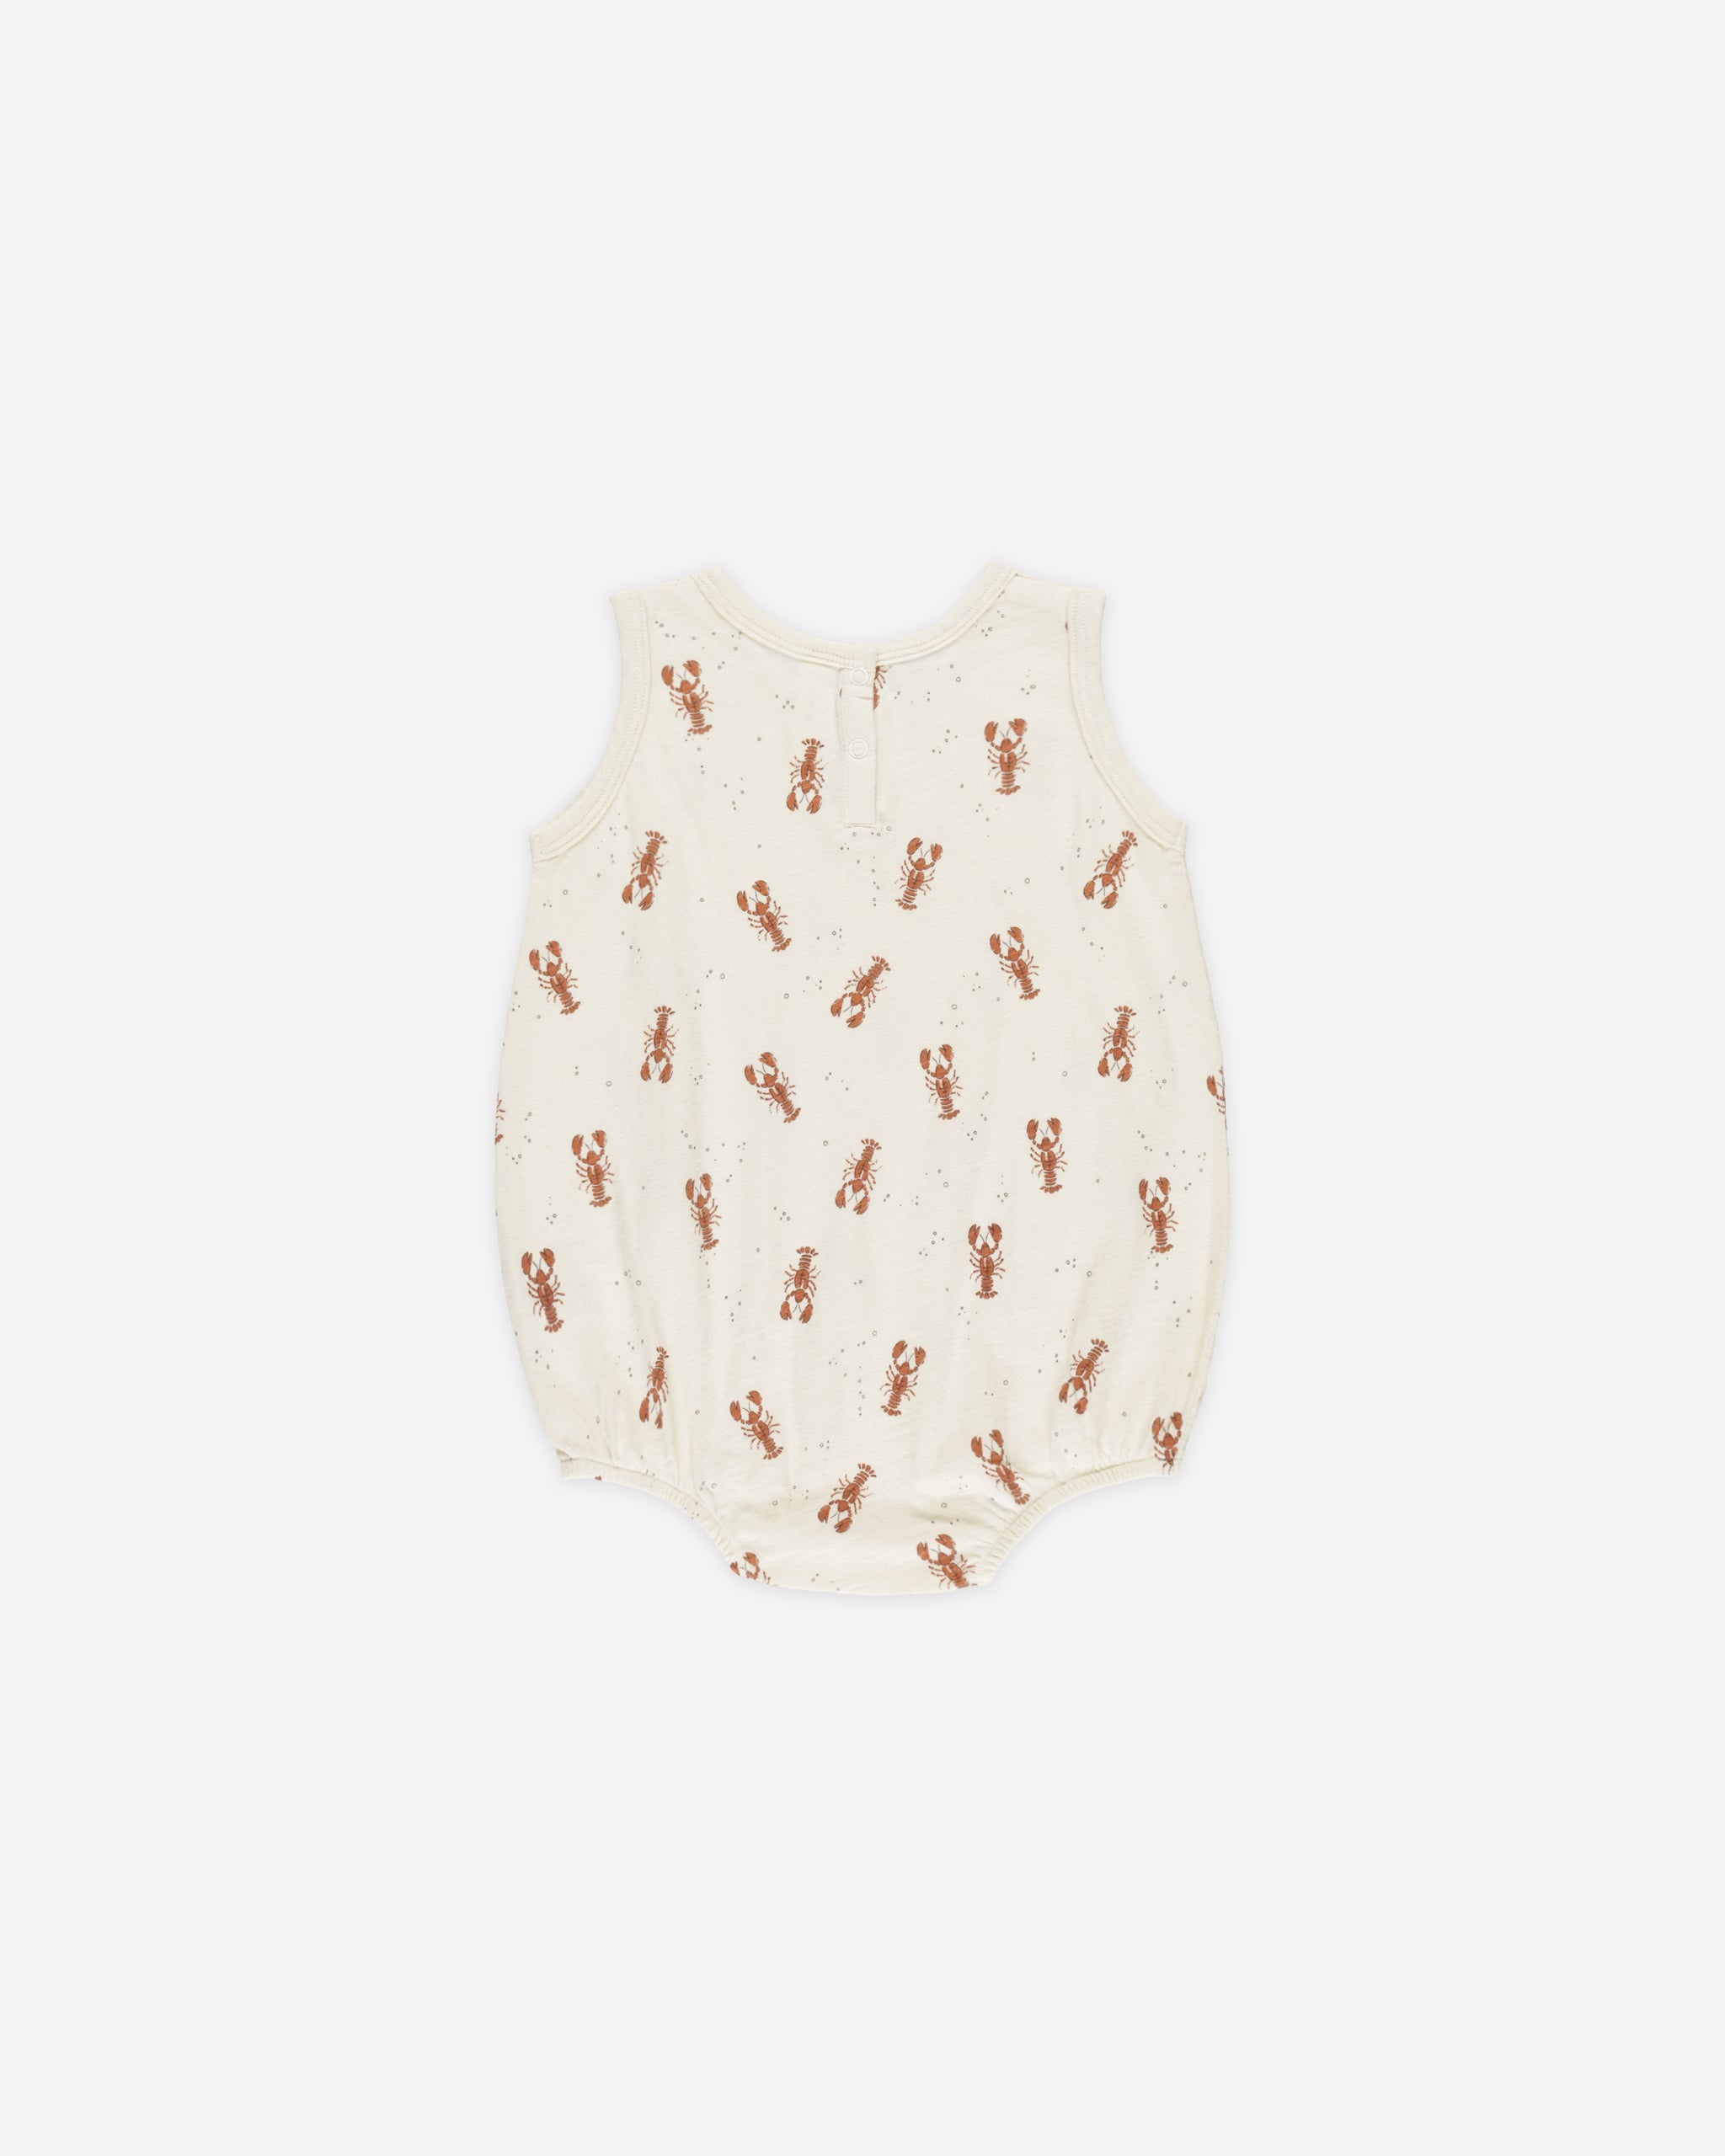 Bubble Onesie || Lobsters - Rylee + Cru | Kids Clothes | Trendy Baby Clothes | Modern Infant Outfits |